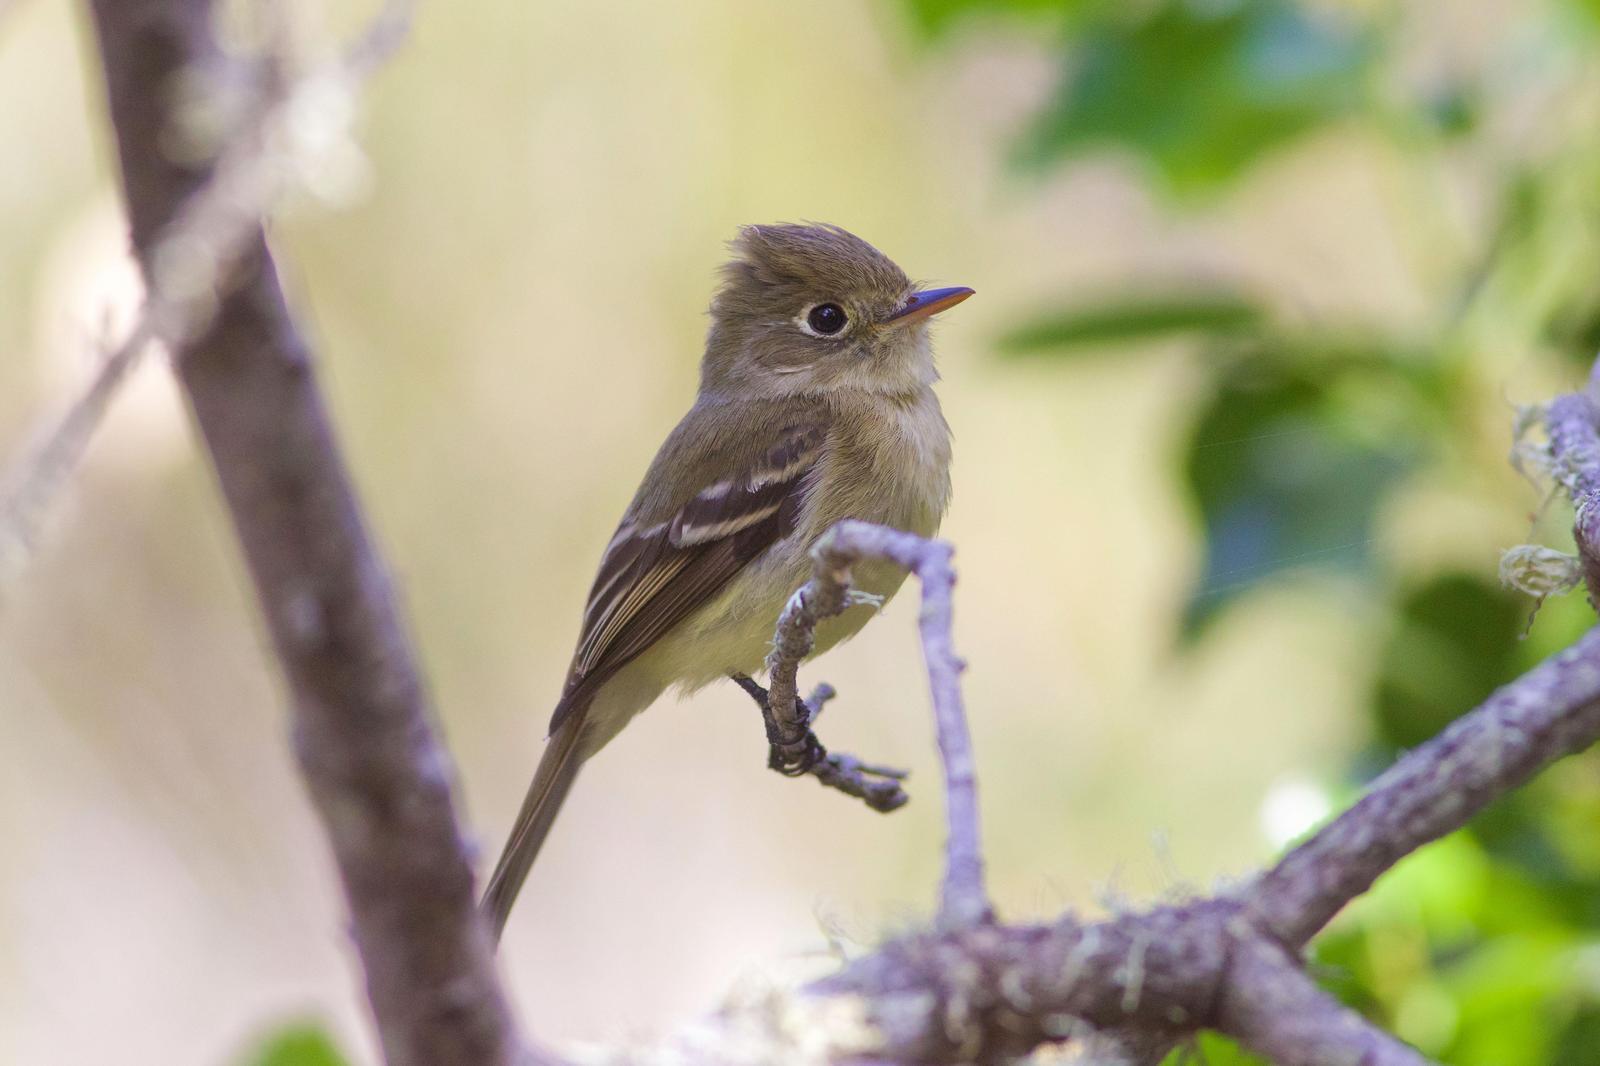 Pacific-slope Flycatcher Photo by Tom Ford-Hutchinson